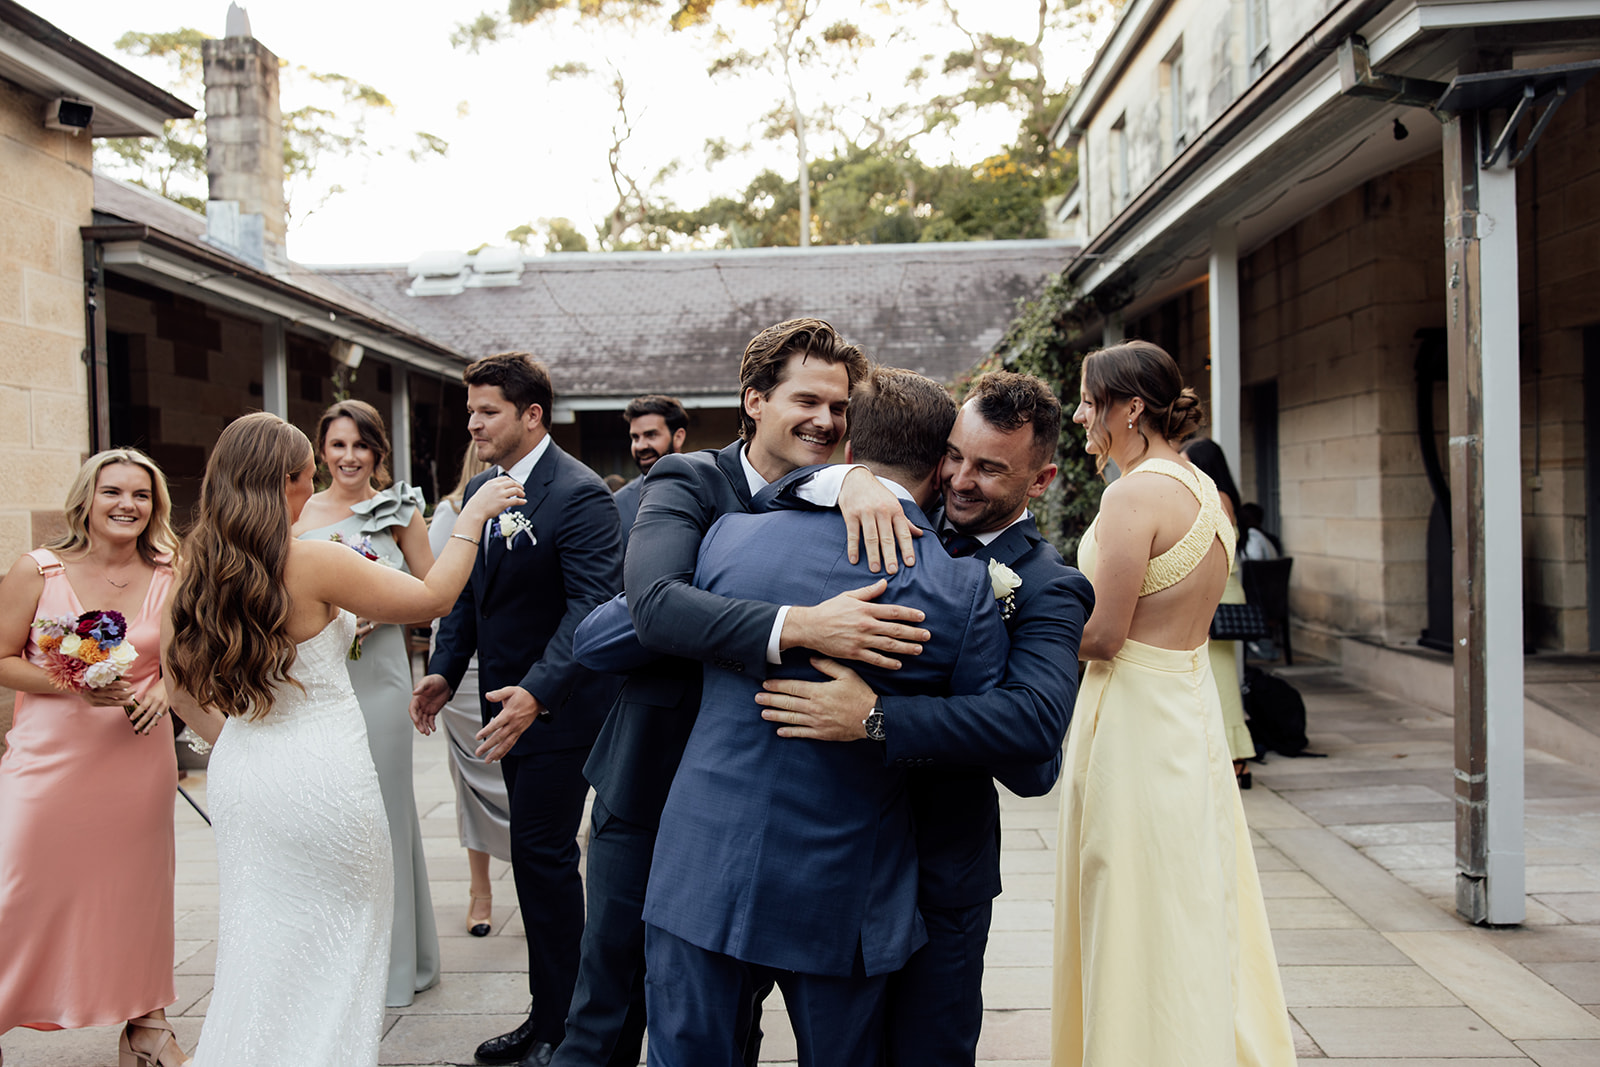 people hugging at a wedding